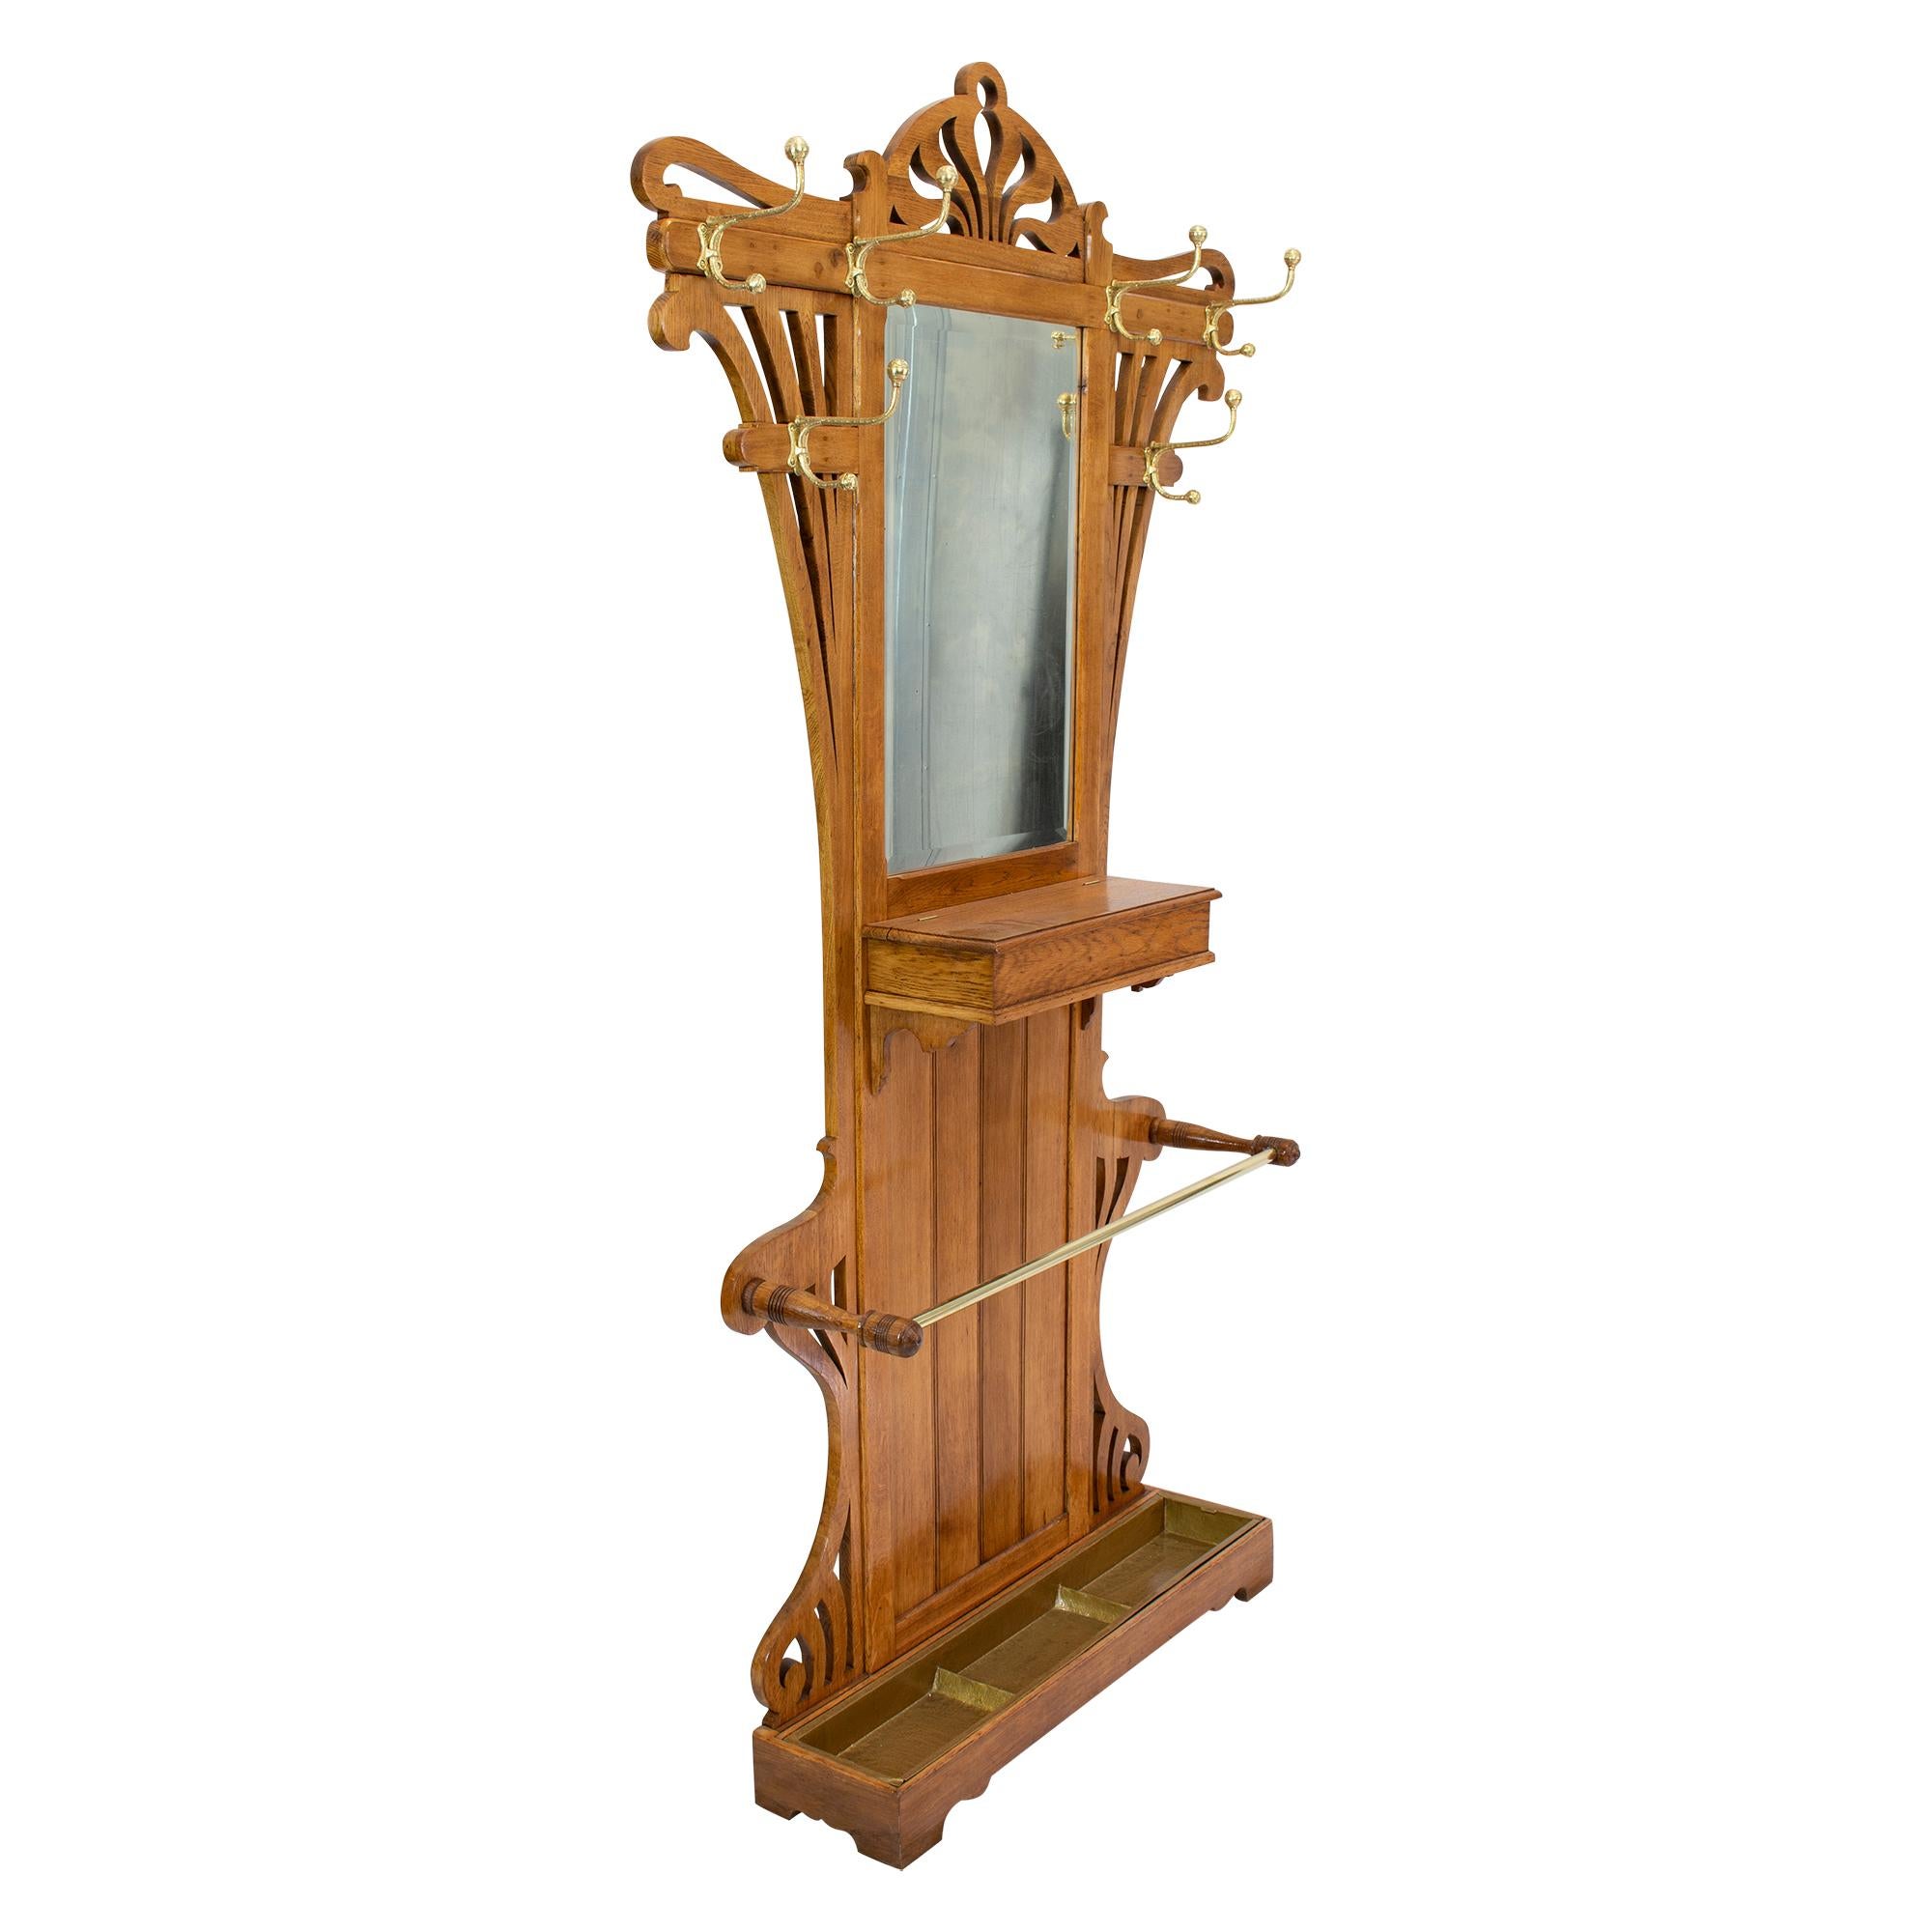 Very beautiful Art Nouveau wardrobe in oakwood with solid brass hooks. The wardrobe has a big umbrella stand as well as six clothes hooks. The wardrobe is from the time around 1900 from Germany. The mirror is facetted.